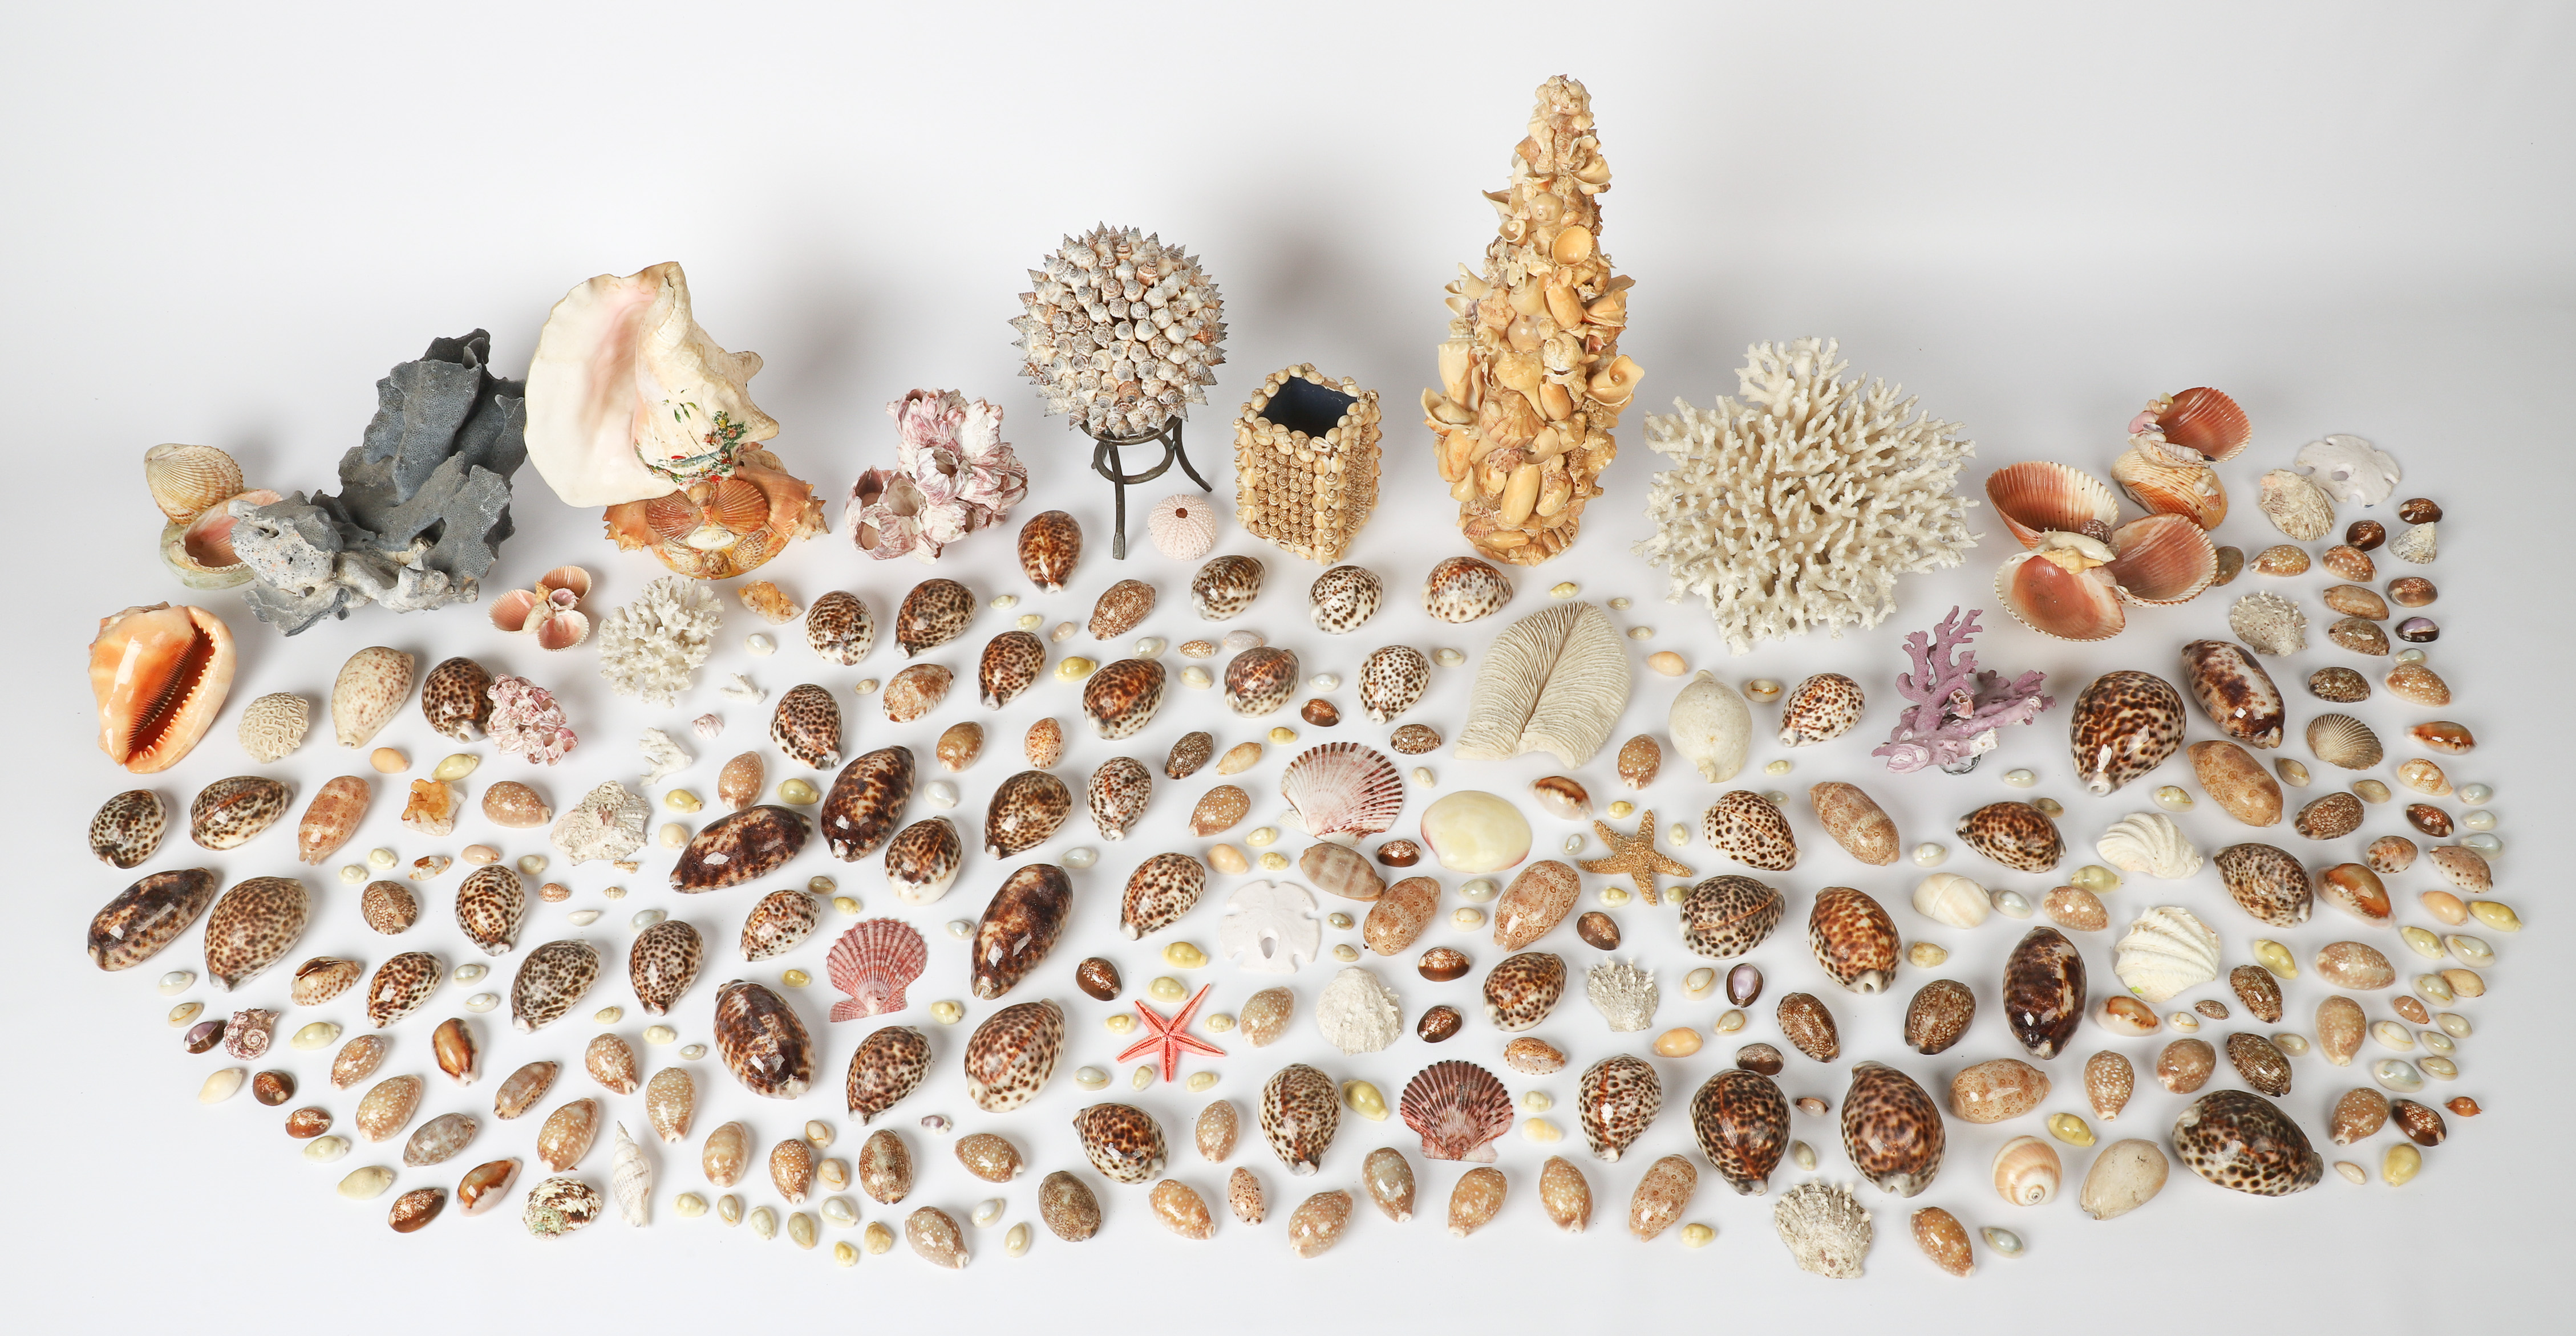 A large collection of Coral, seashells